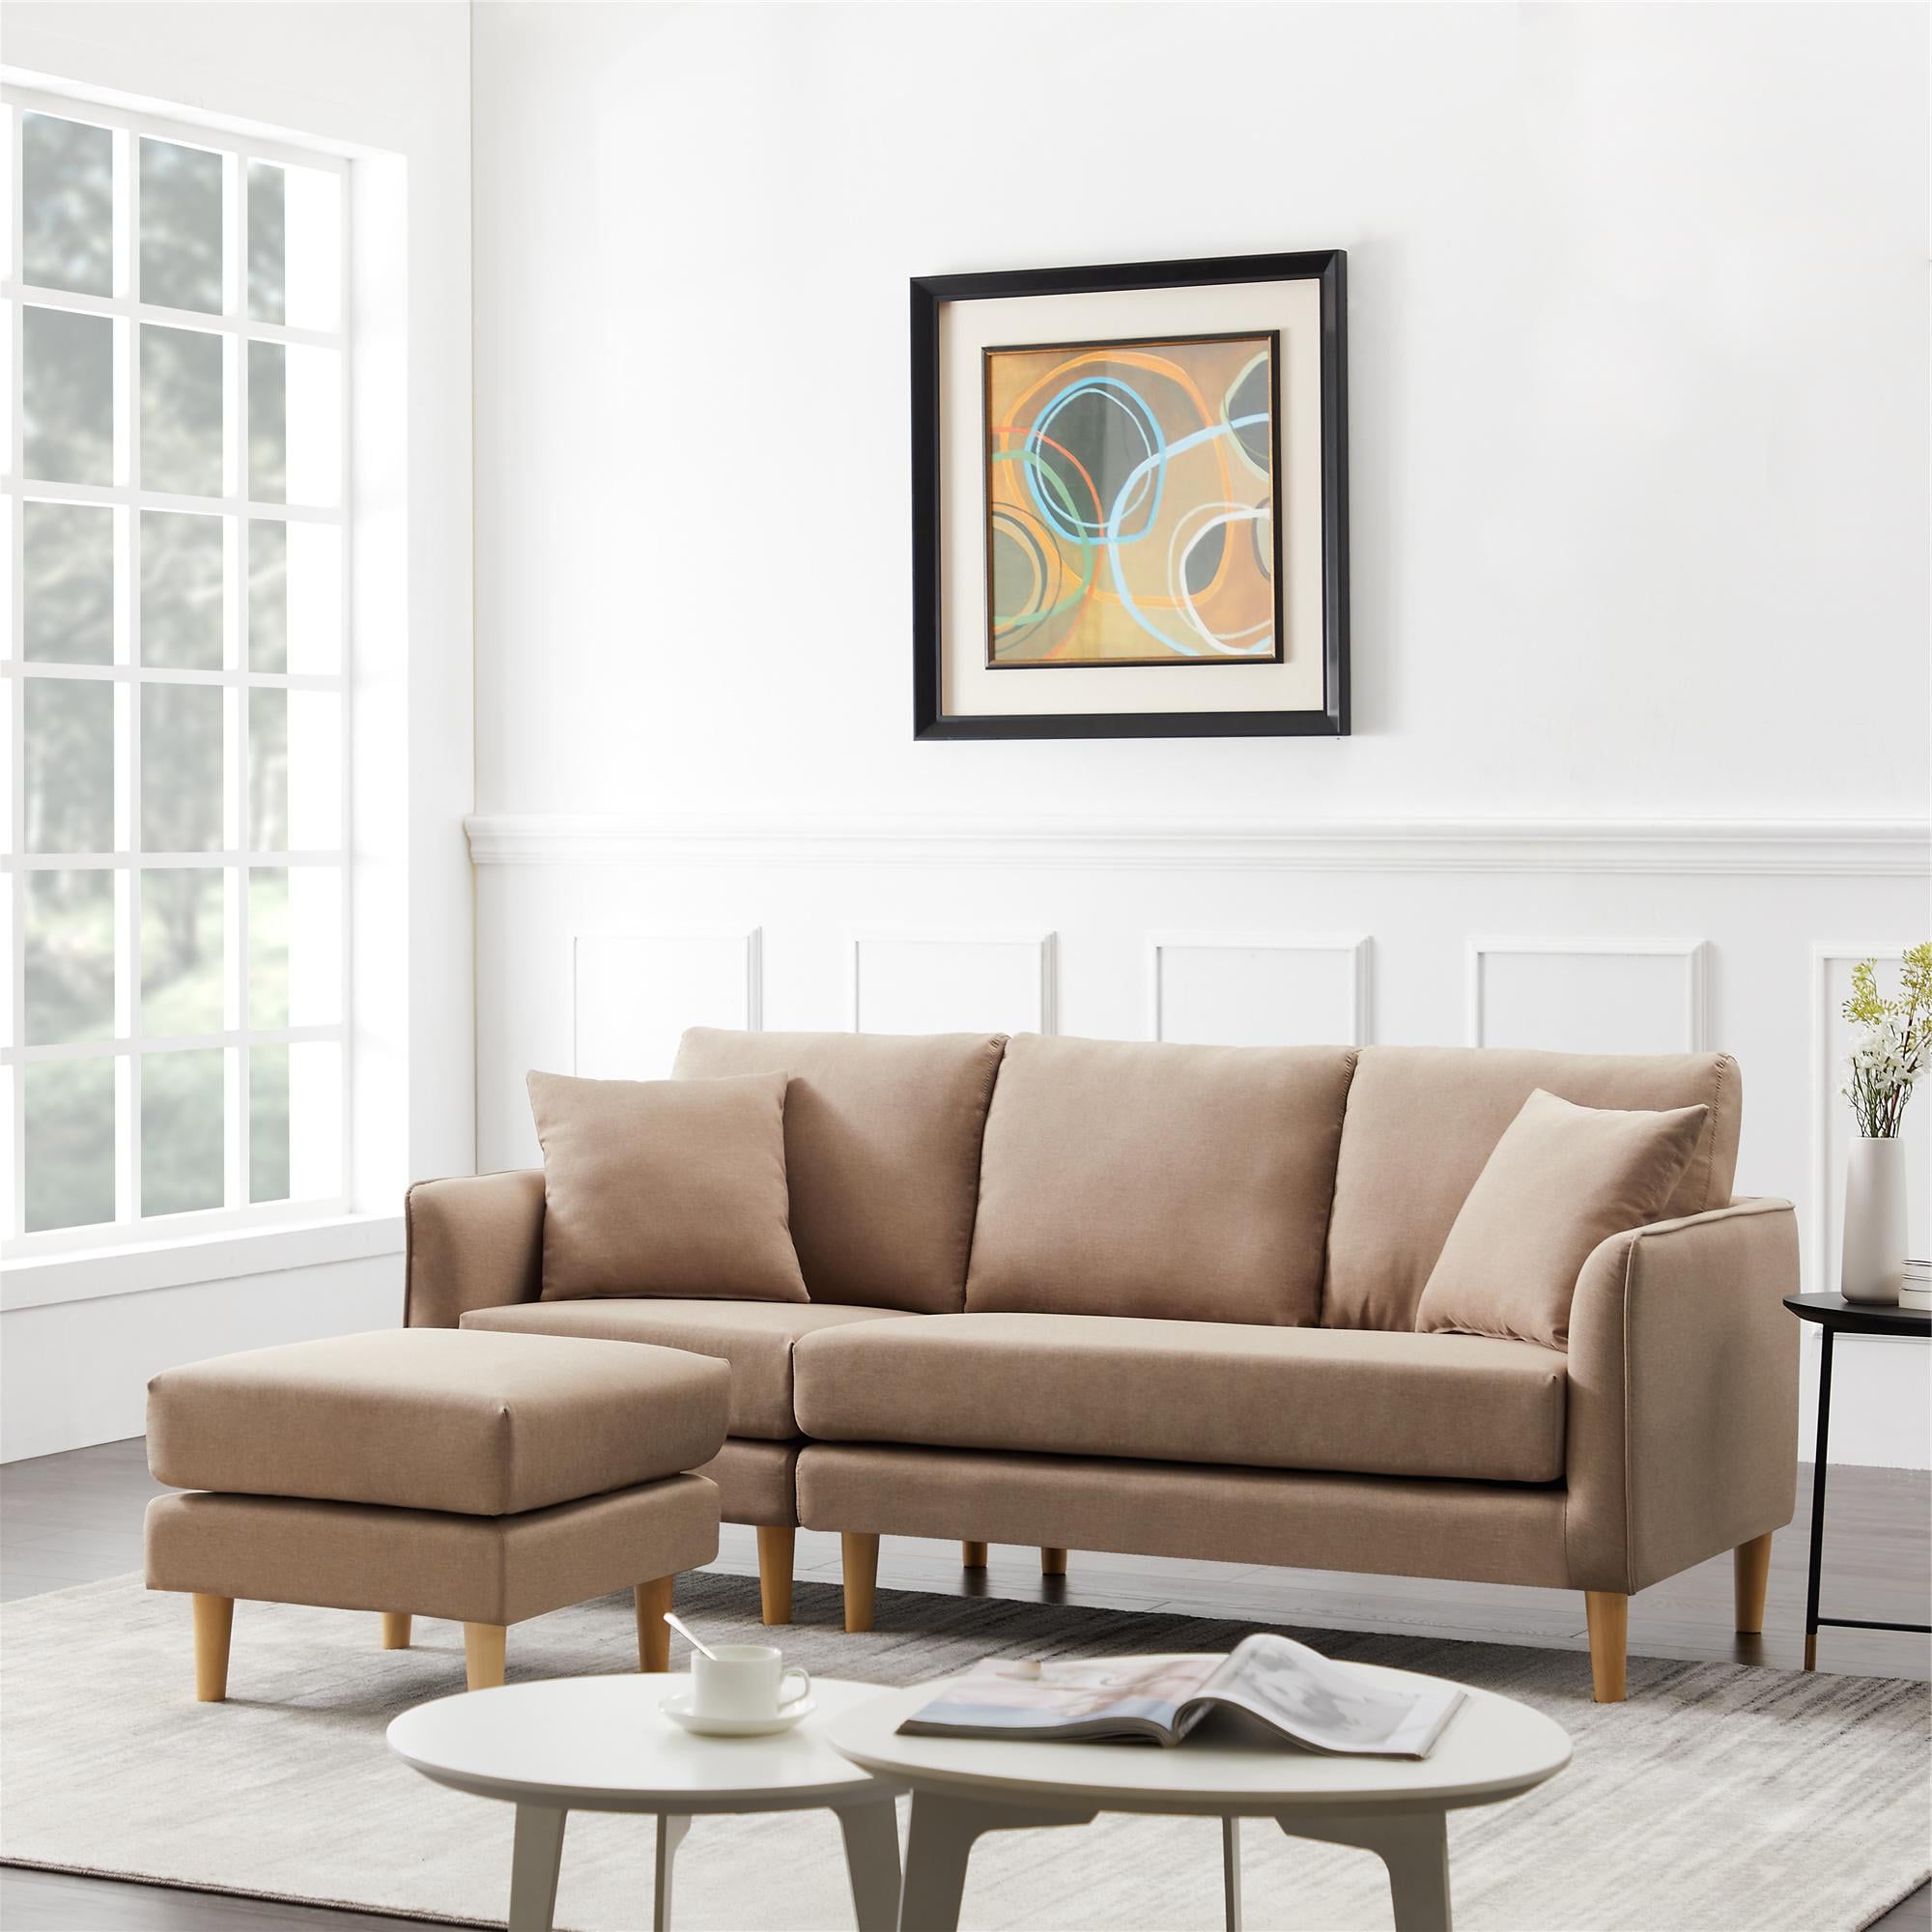 Modern Upholstered Sofa With Reversible Sectional Chaise L Shaped Pertaining To L Shape Couches With Reversible Chaises (View 3 of 20)